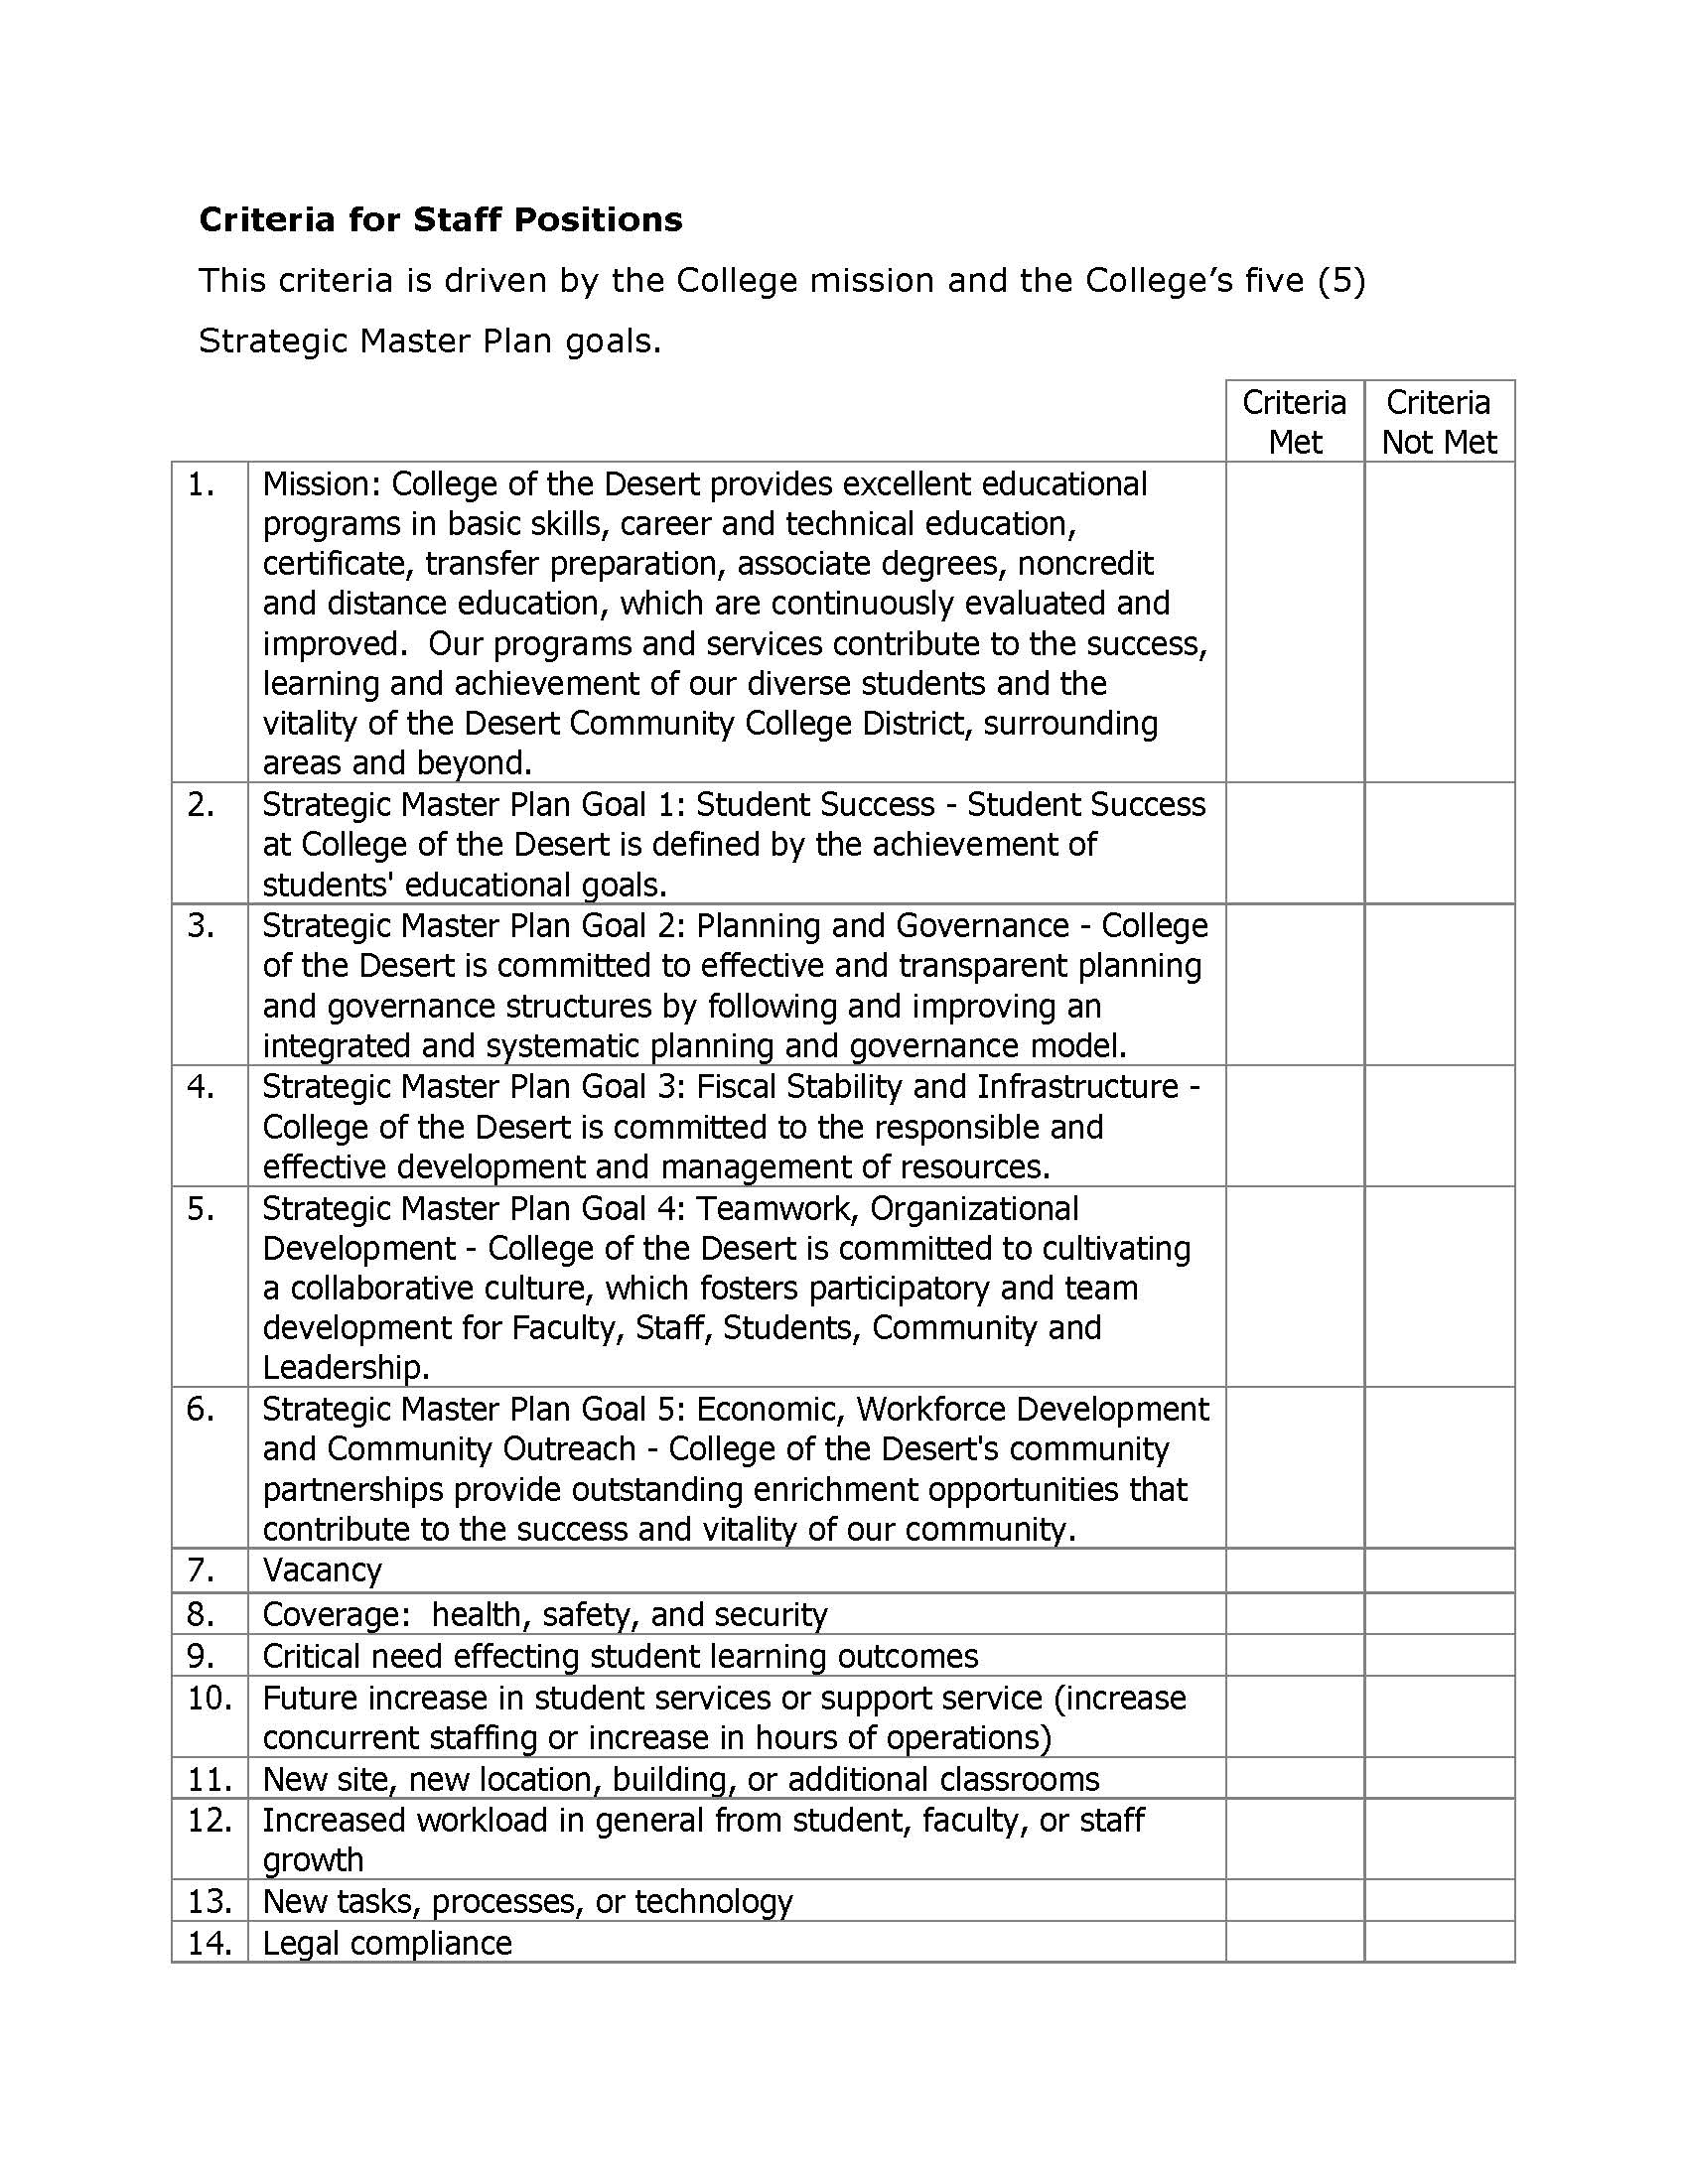 Criteria for Staff Positions